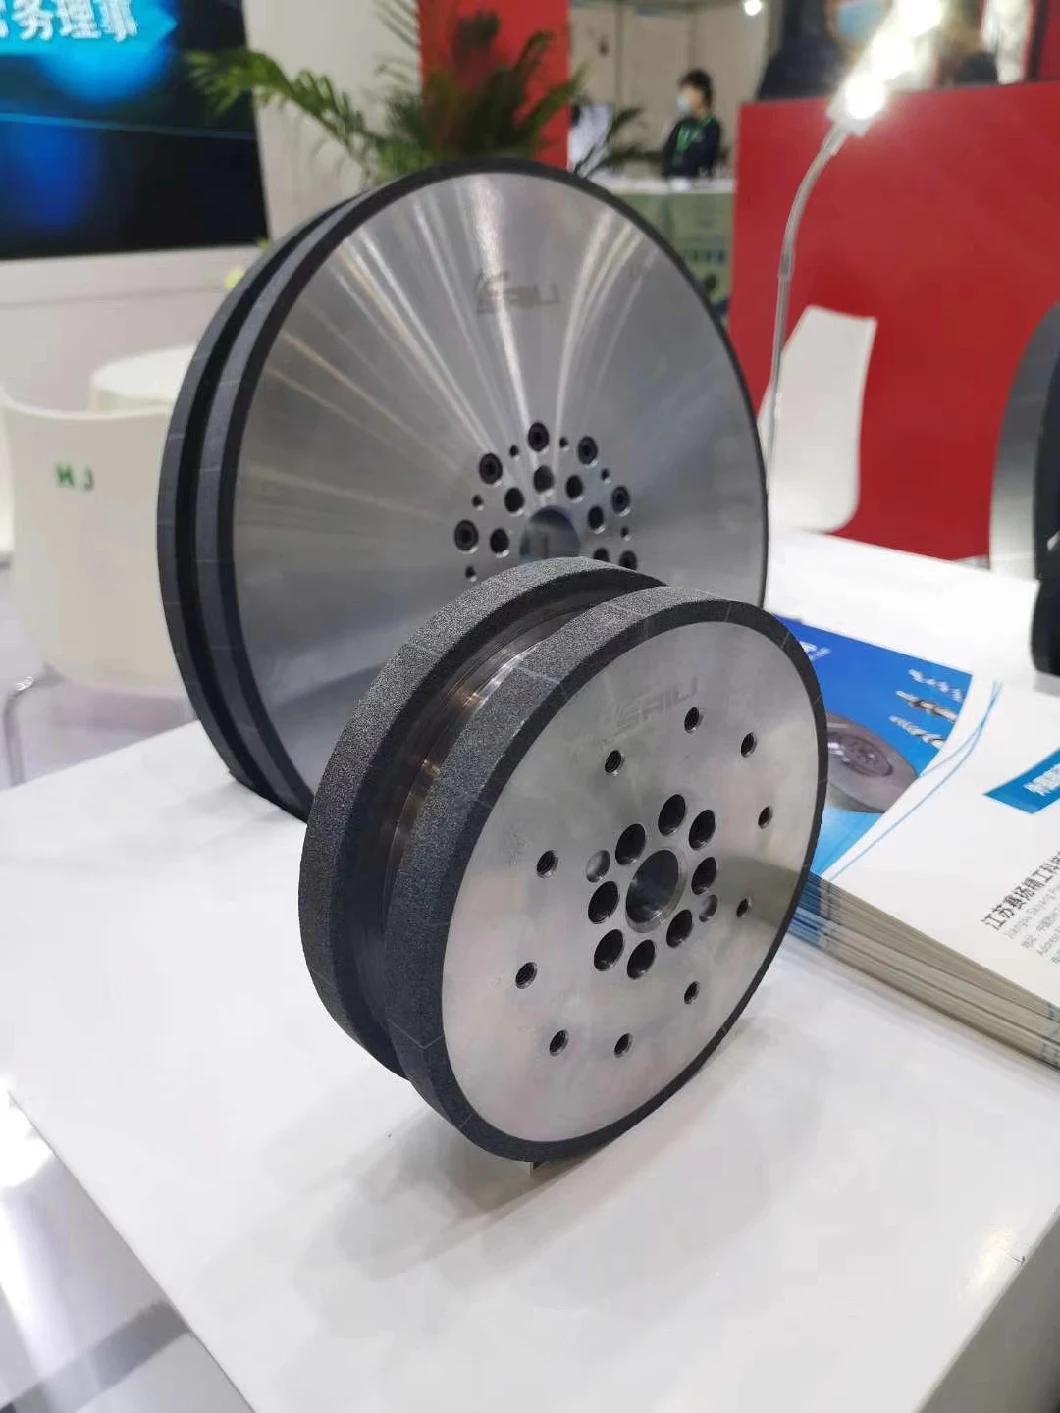 Resin Bond Superabrasive Diamond and CBN Grinding Wheels, Surface & Face Grinding 1A1, 3A1, 6A2 14A1 Carbide Wet or Dry